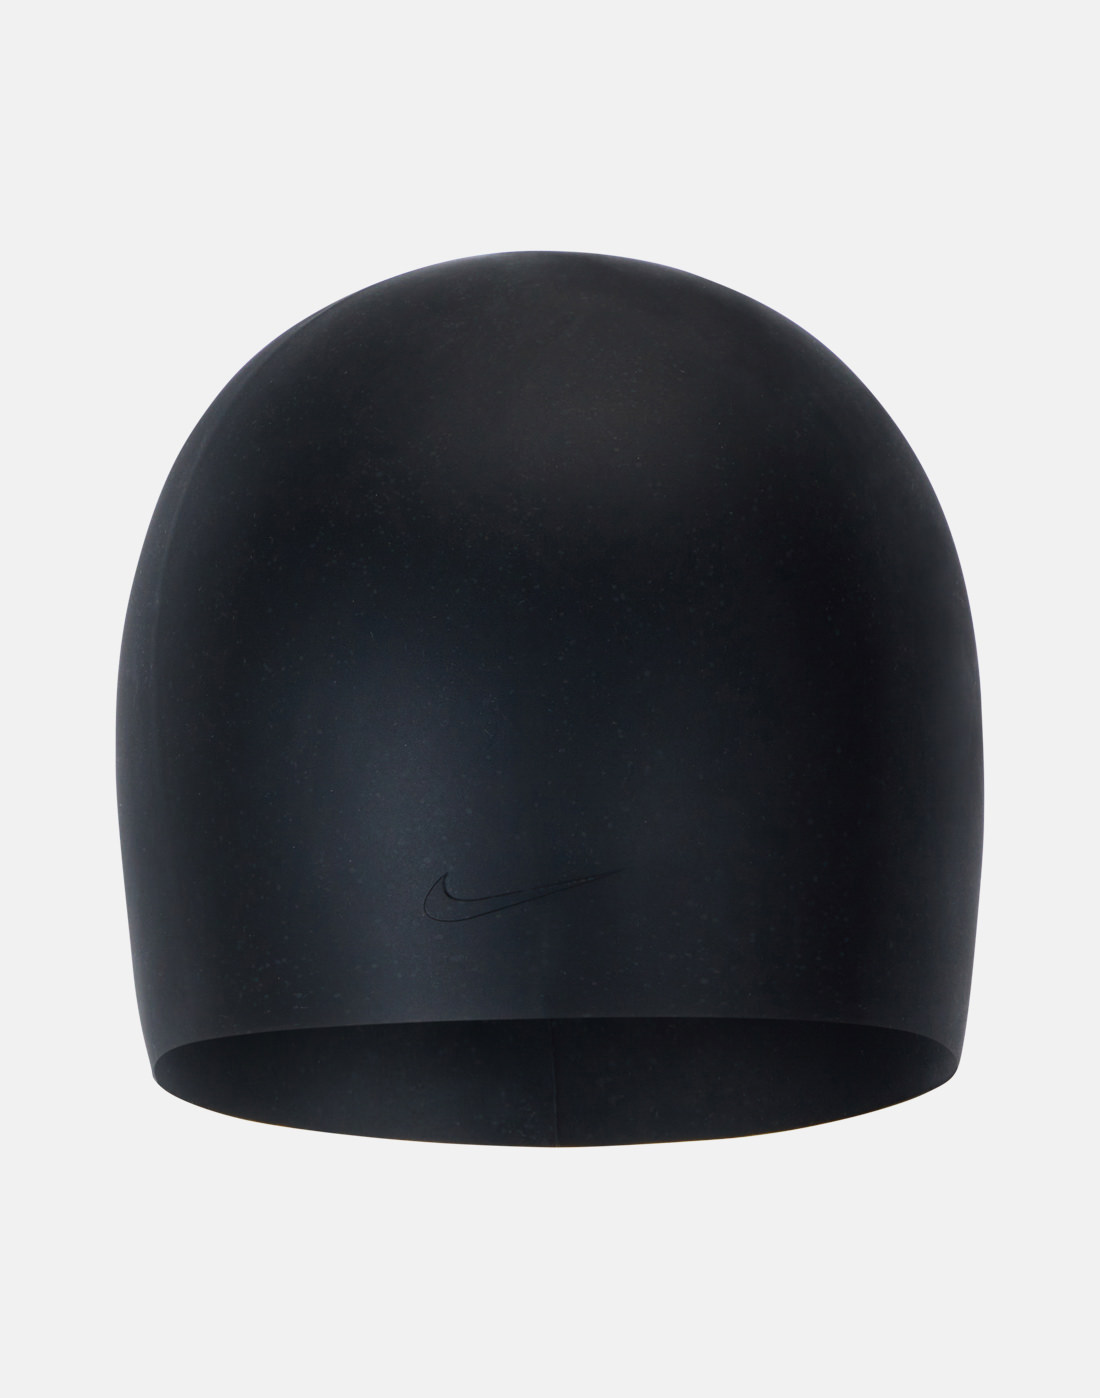 Nike Adult Long Hair Silicone Cap - Black | Life Style Sports IE